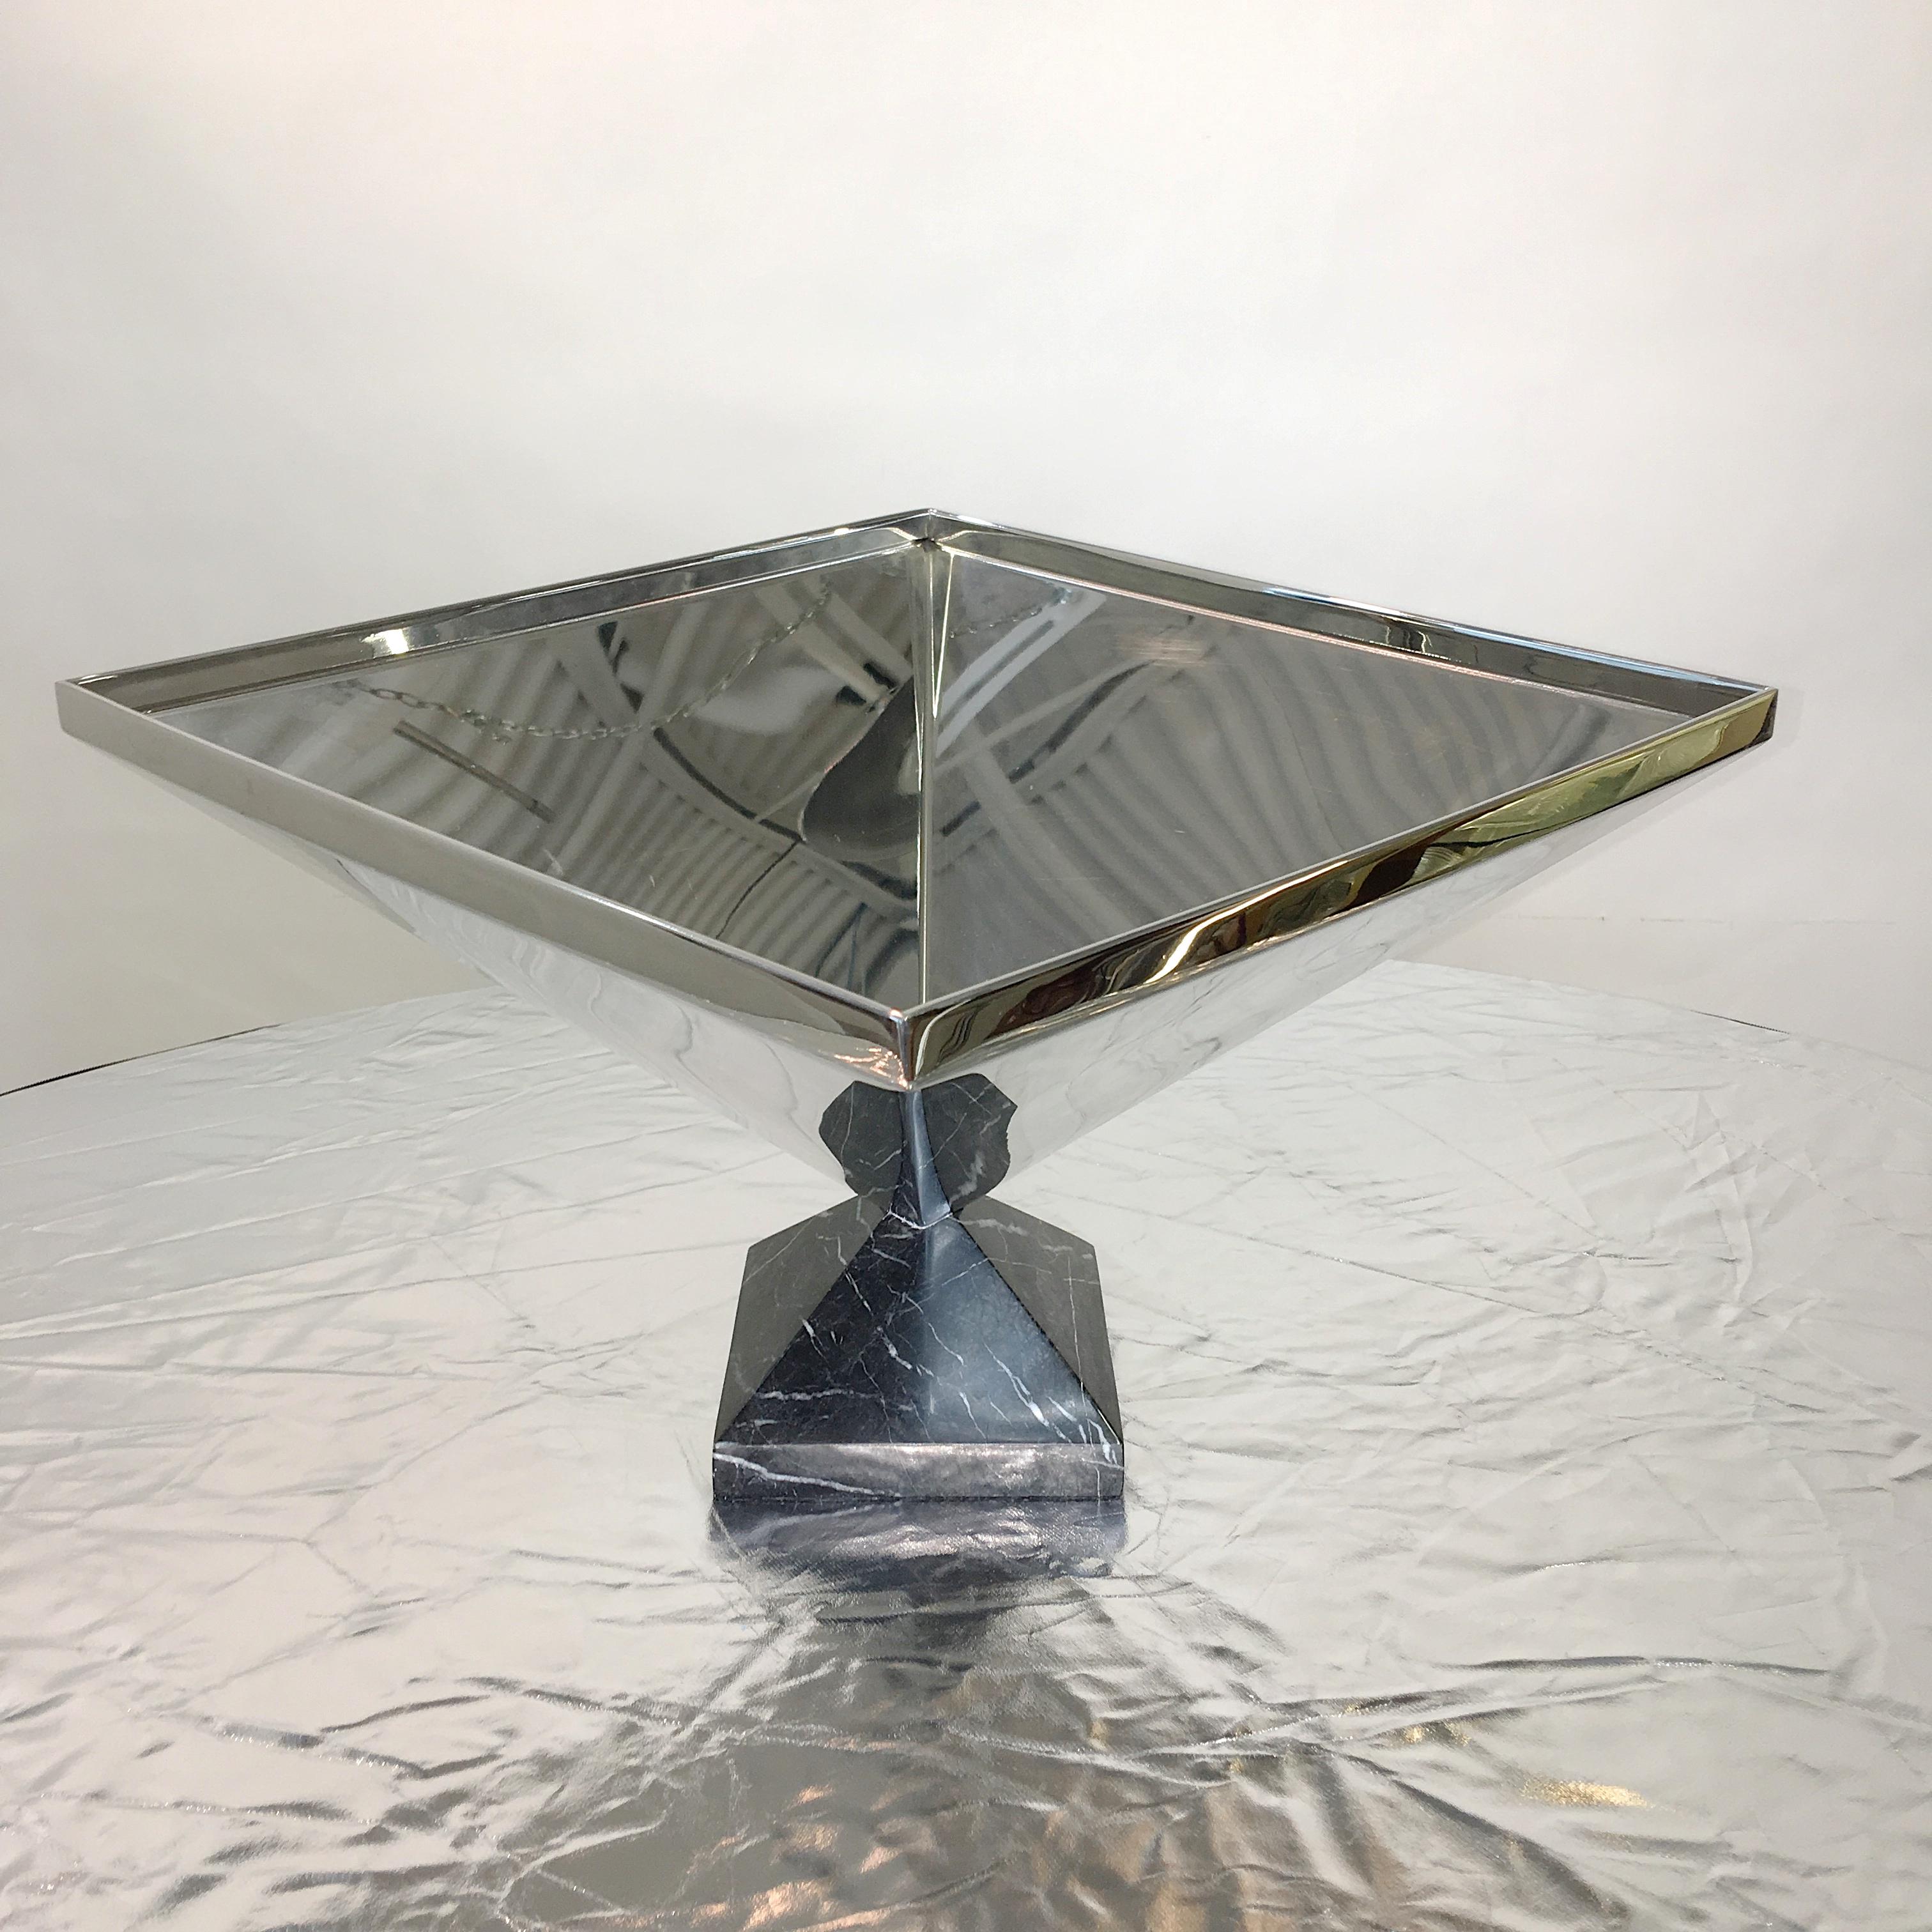 Space Age Inverted Pyramid Polished Stainless Centerpiece on Marble Pyramid Base